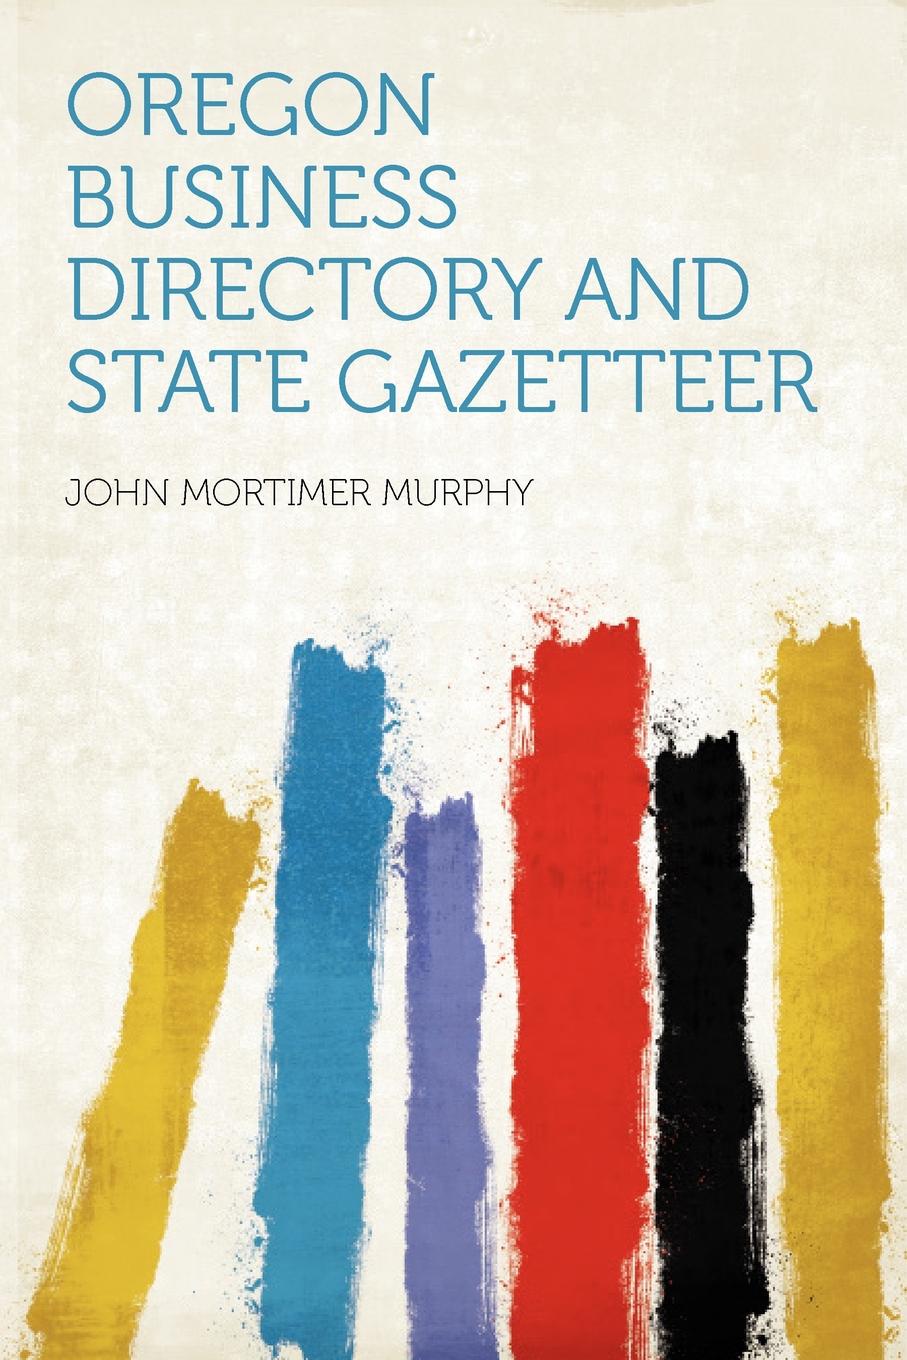 Oregon Business Directory and State Gazetteer